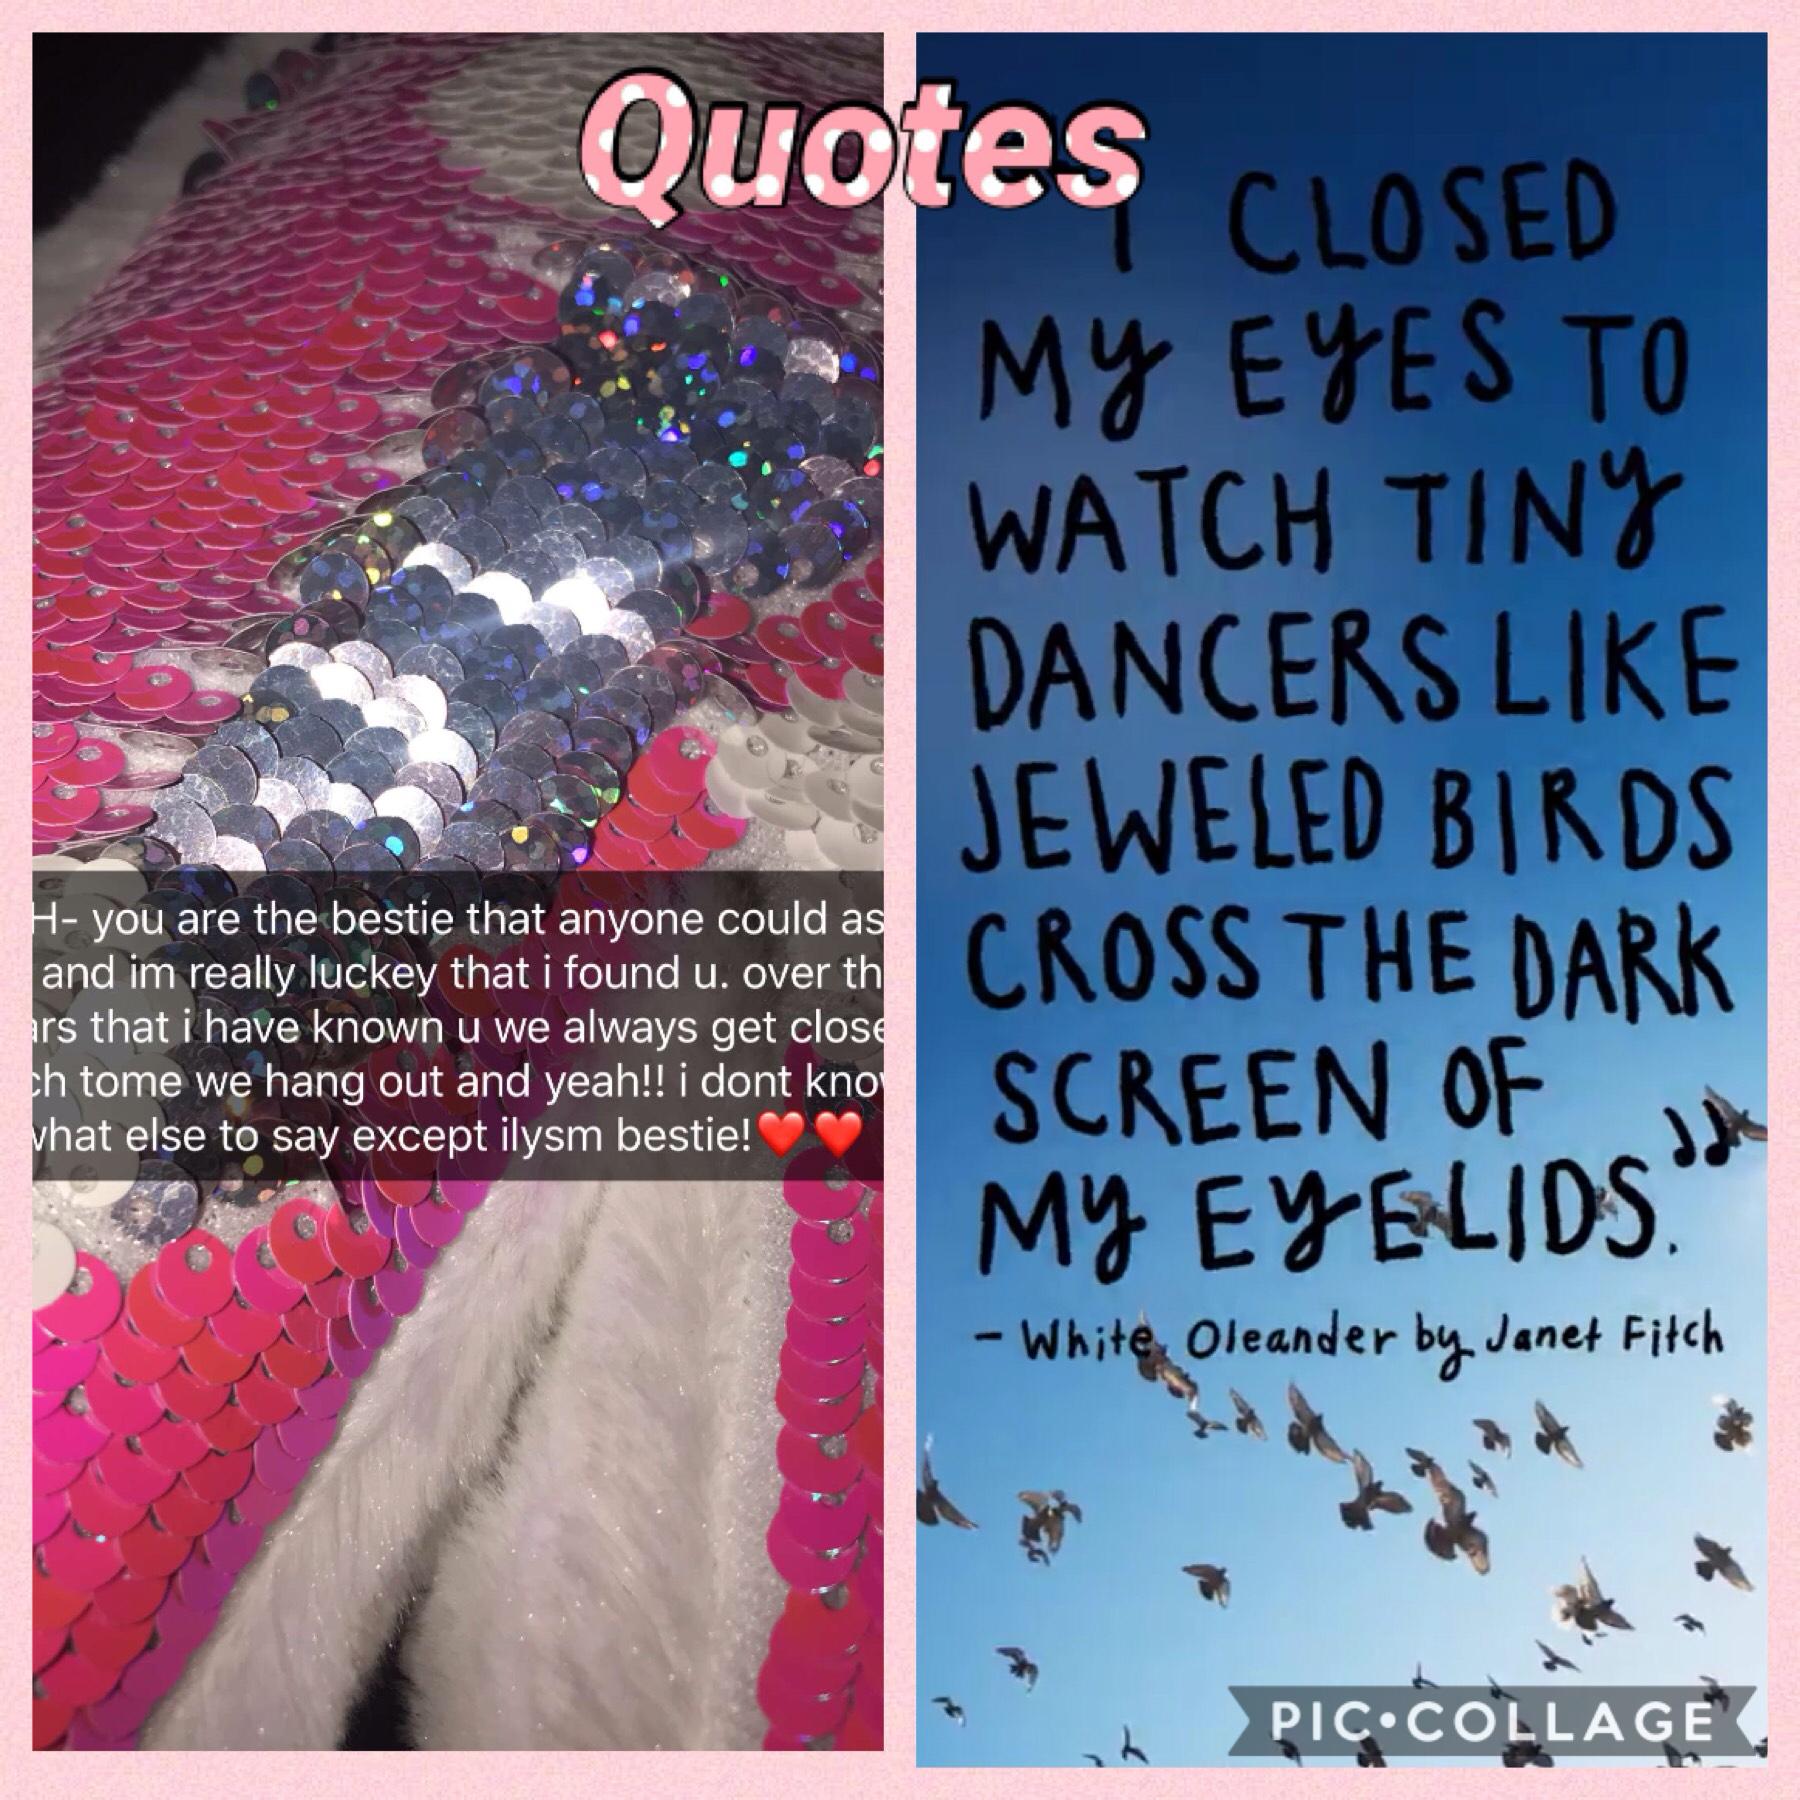 My quotes please follow me and my best friend olive, she is a true friend I have known her since I was so young. I love you so much!!!!!!!!!